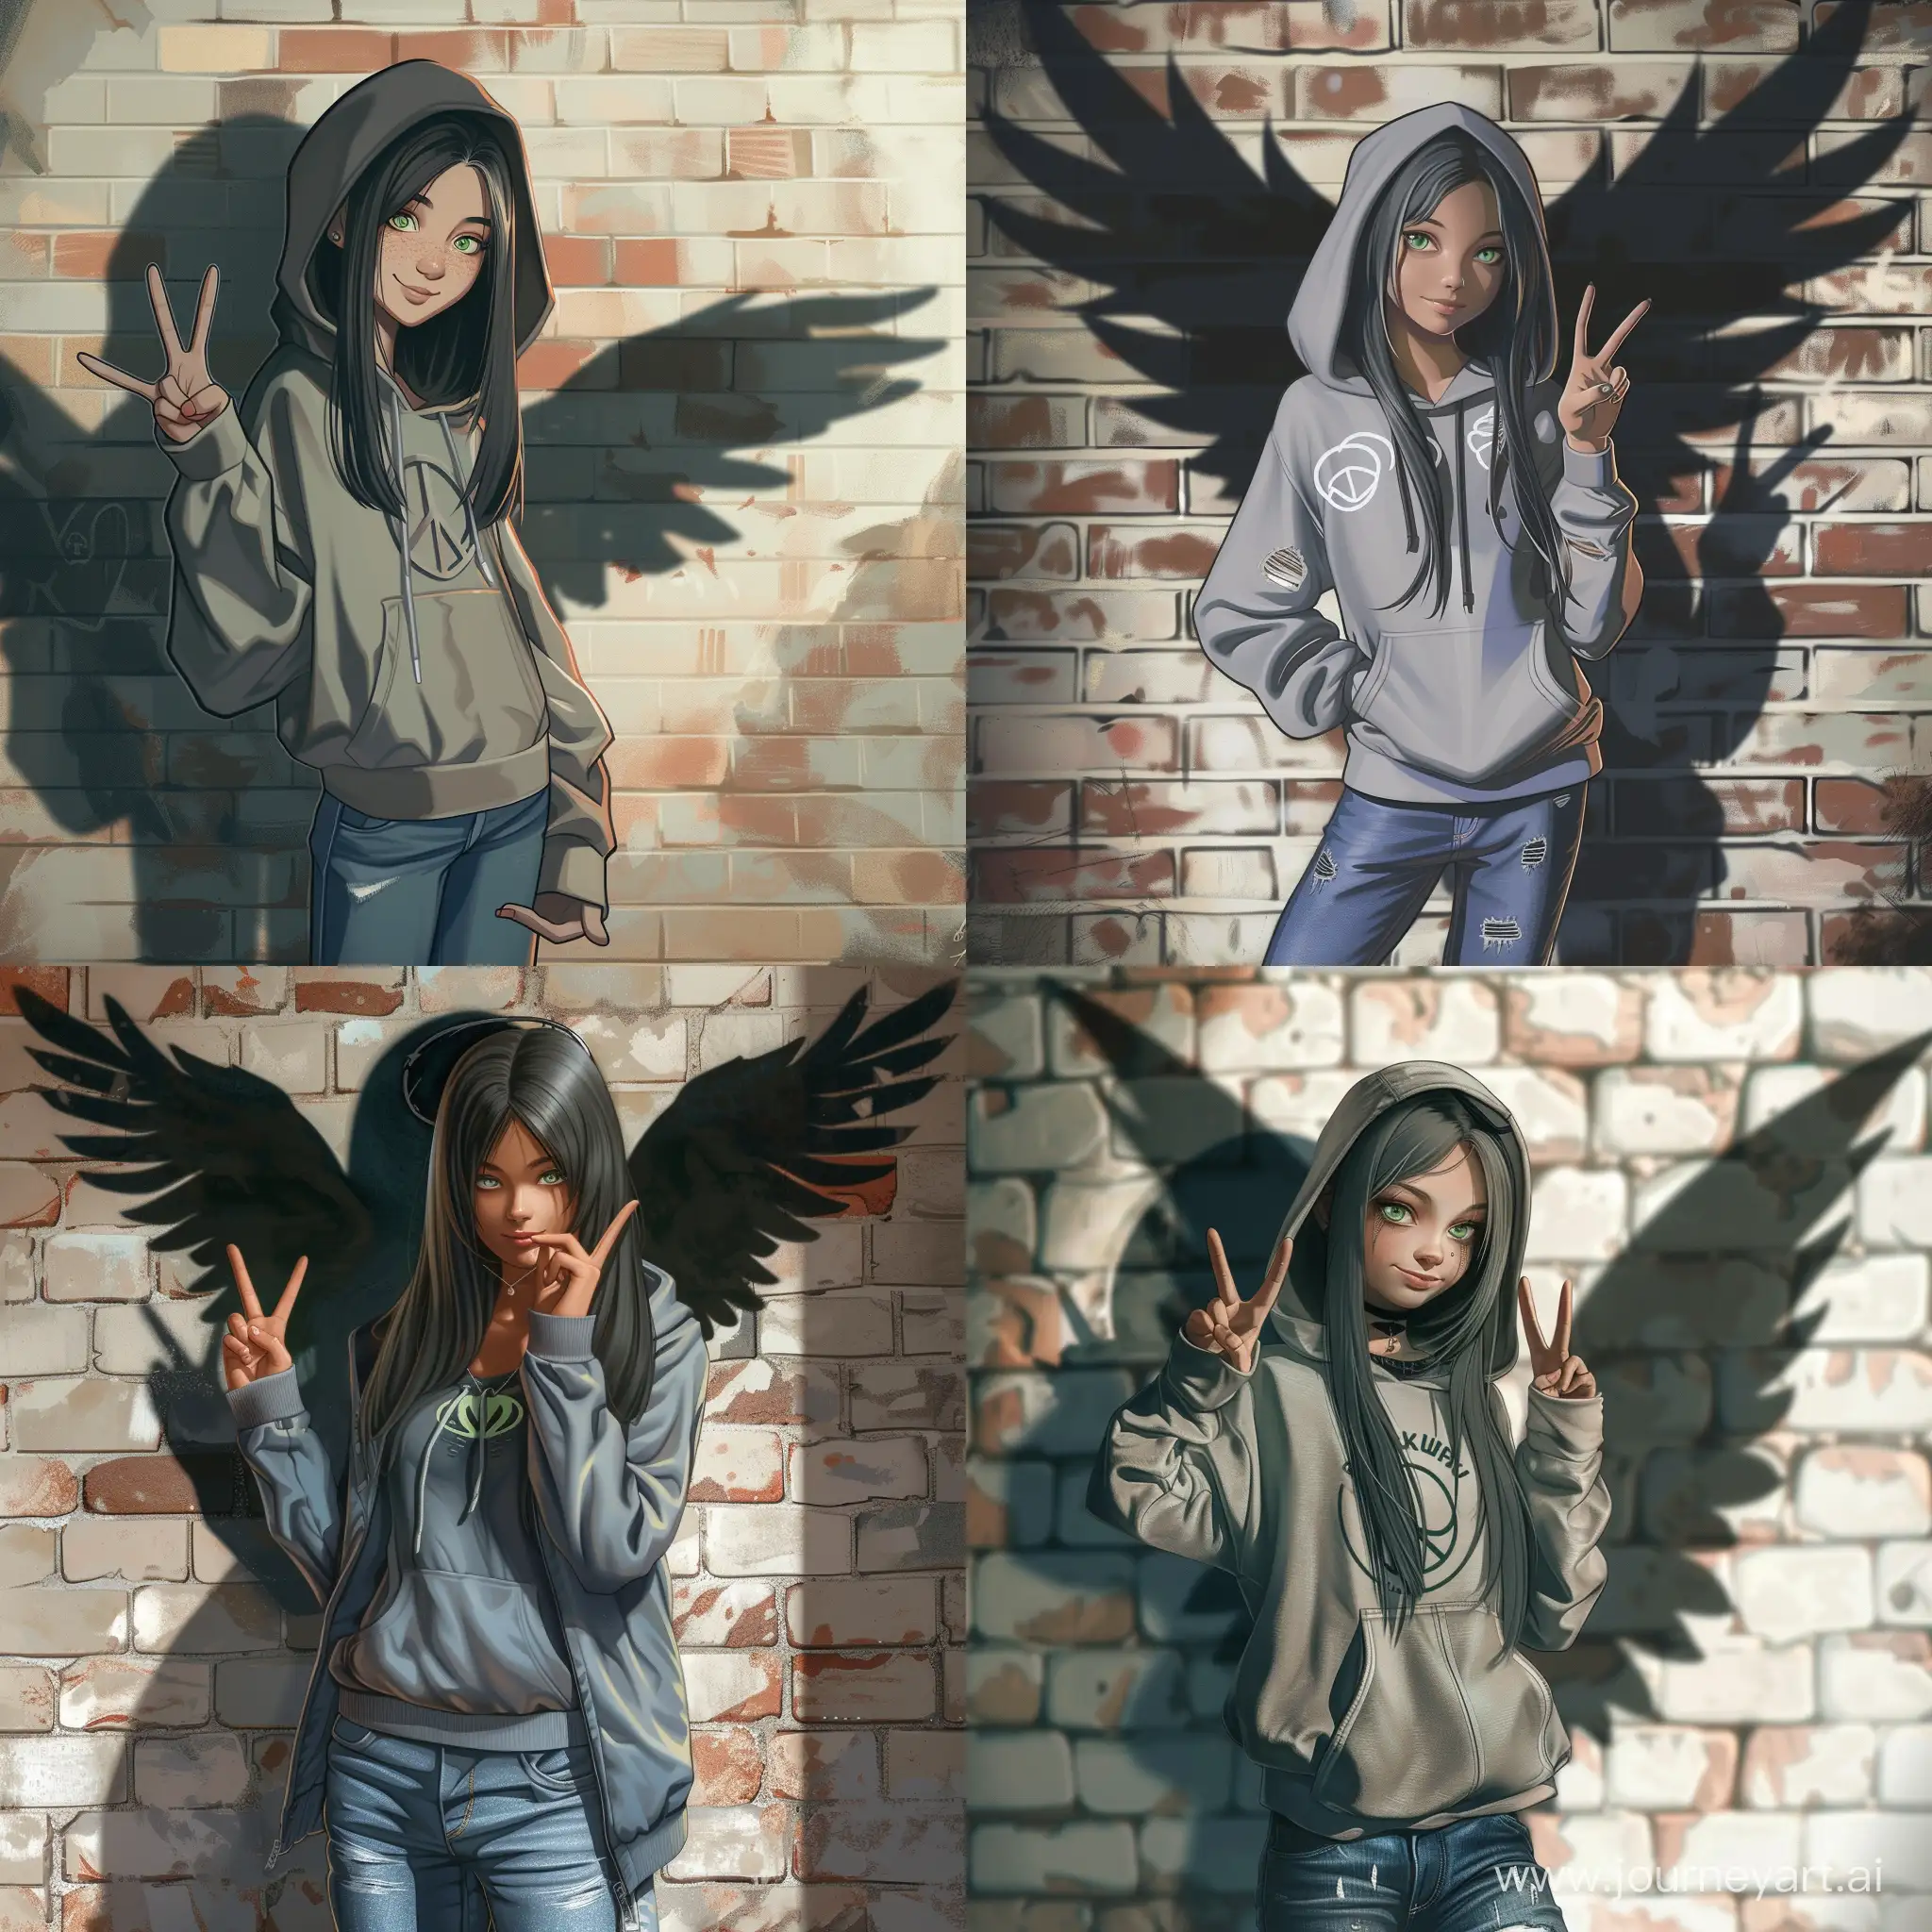 Stylish-Teenage-Fantasy-Darkhaired-Girl-with-Peace-Sign-and-Ethereal-Wings